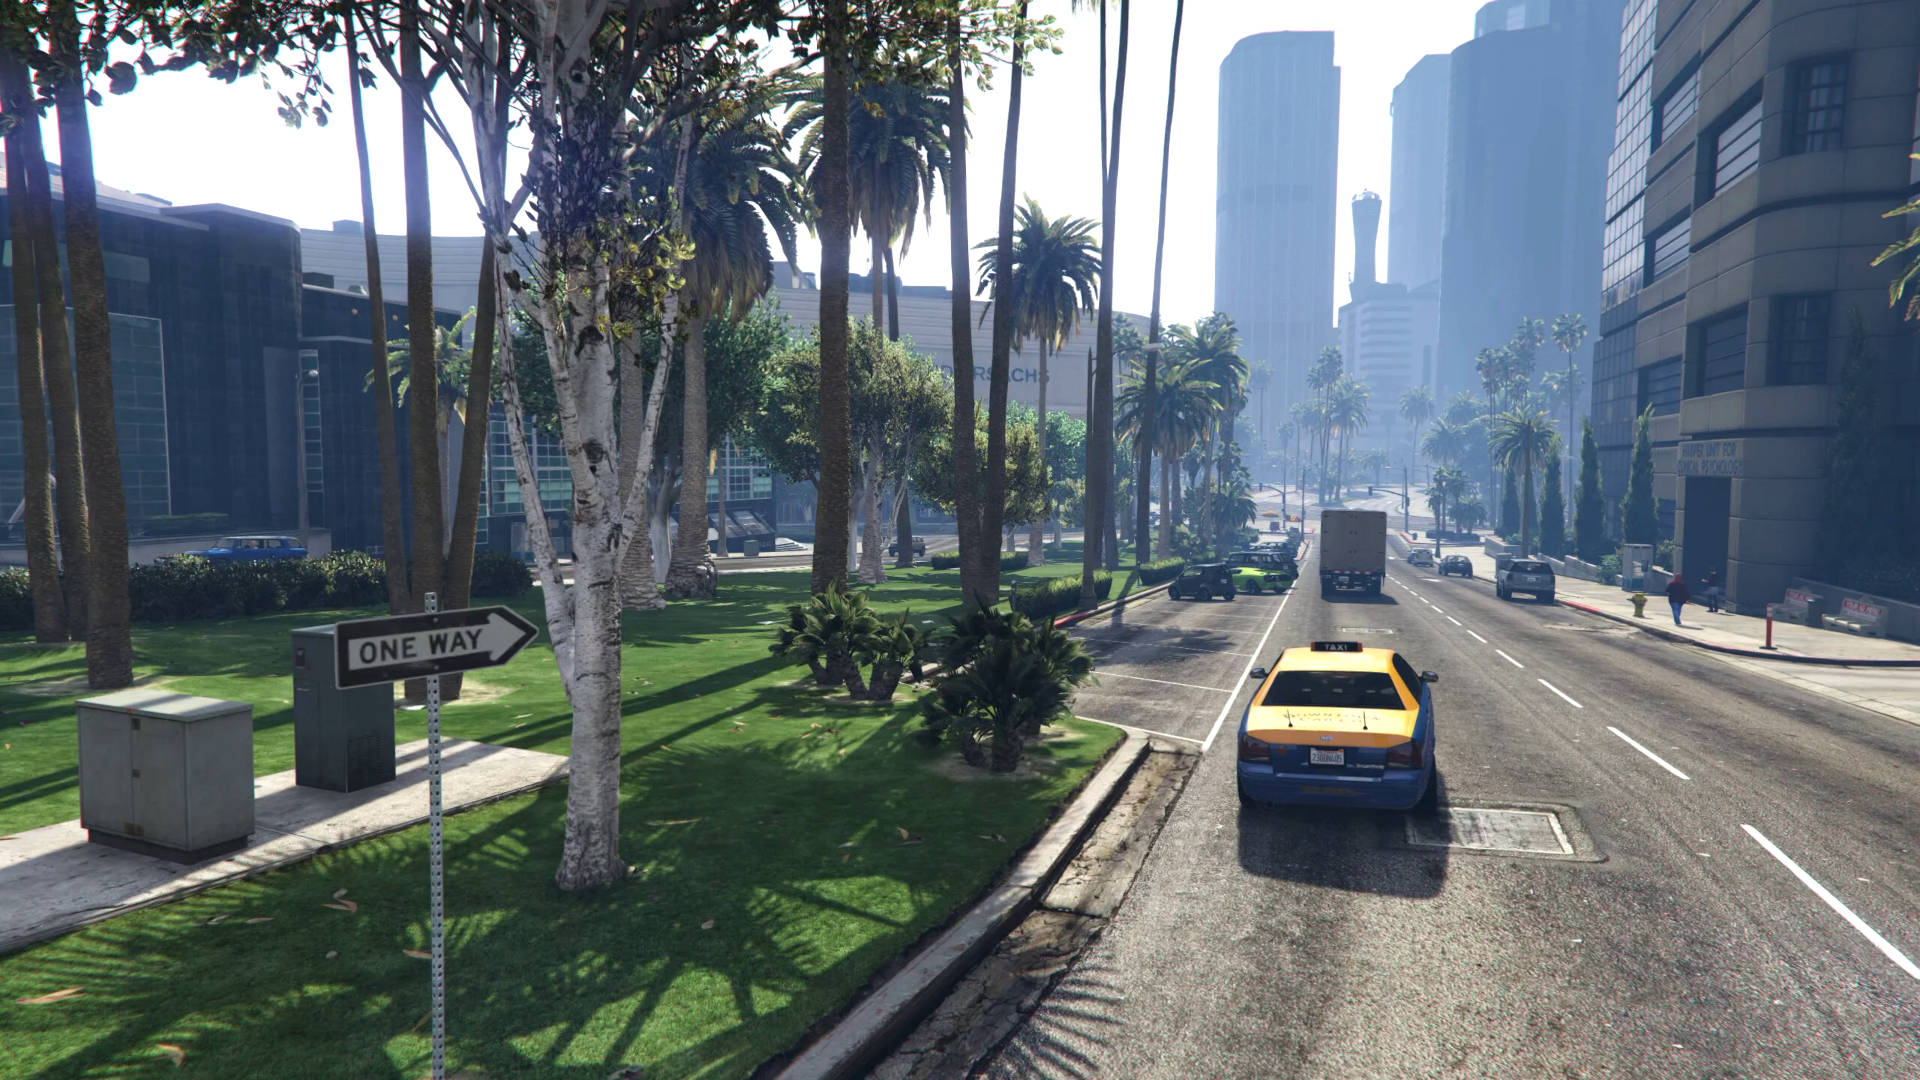 The Top 5 Mods for GTA V PC